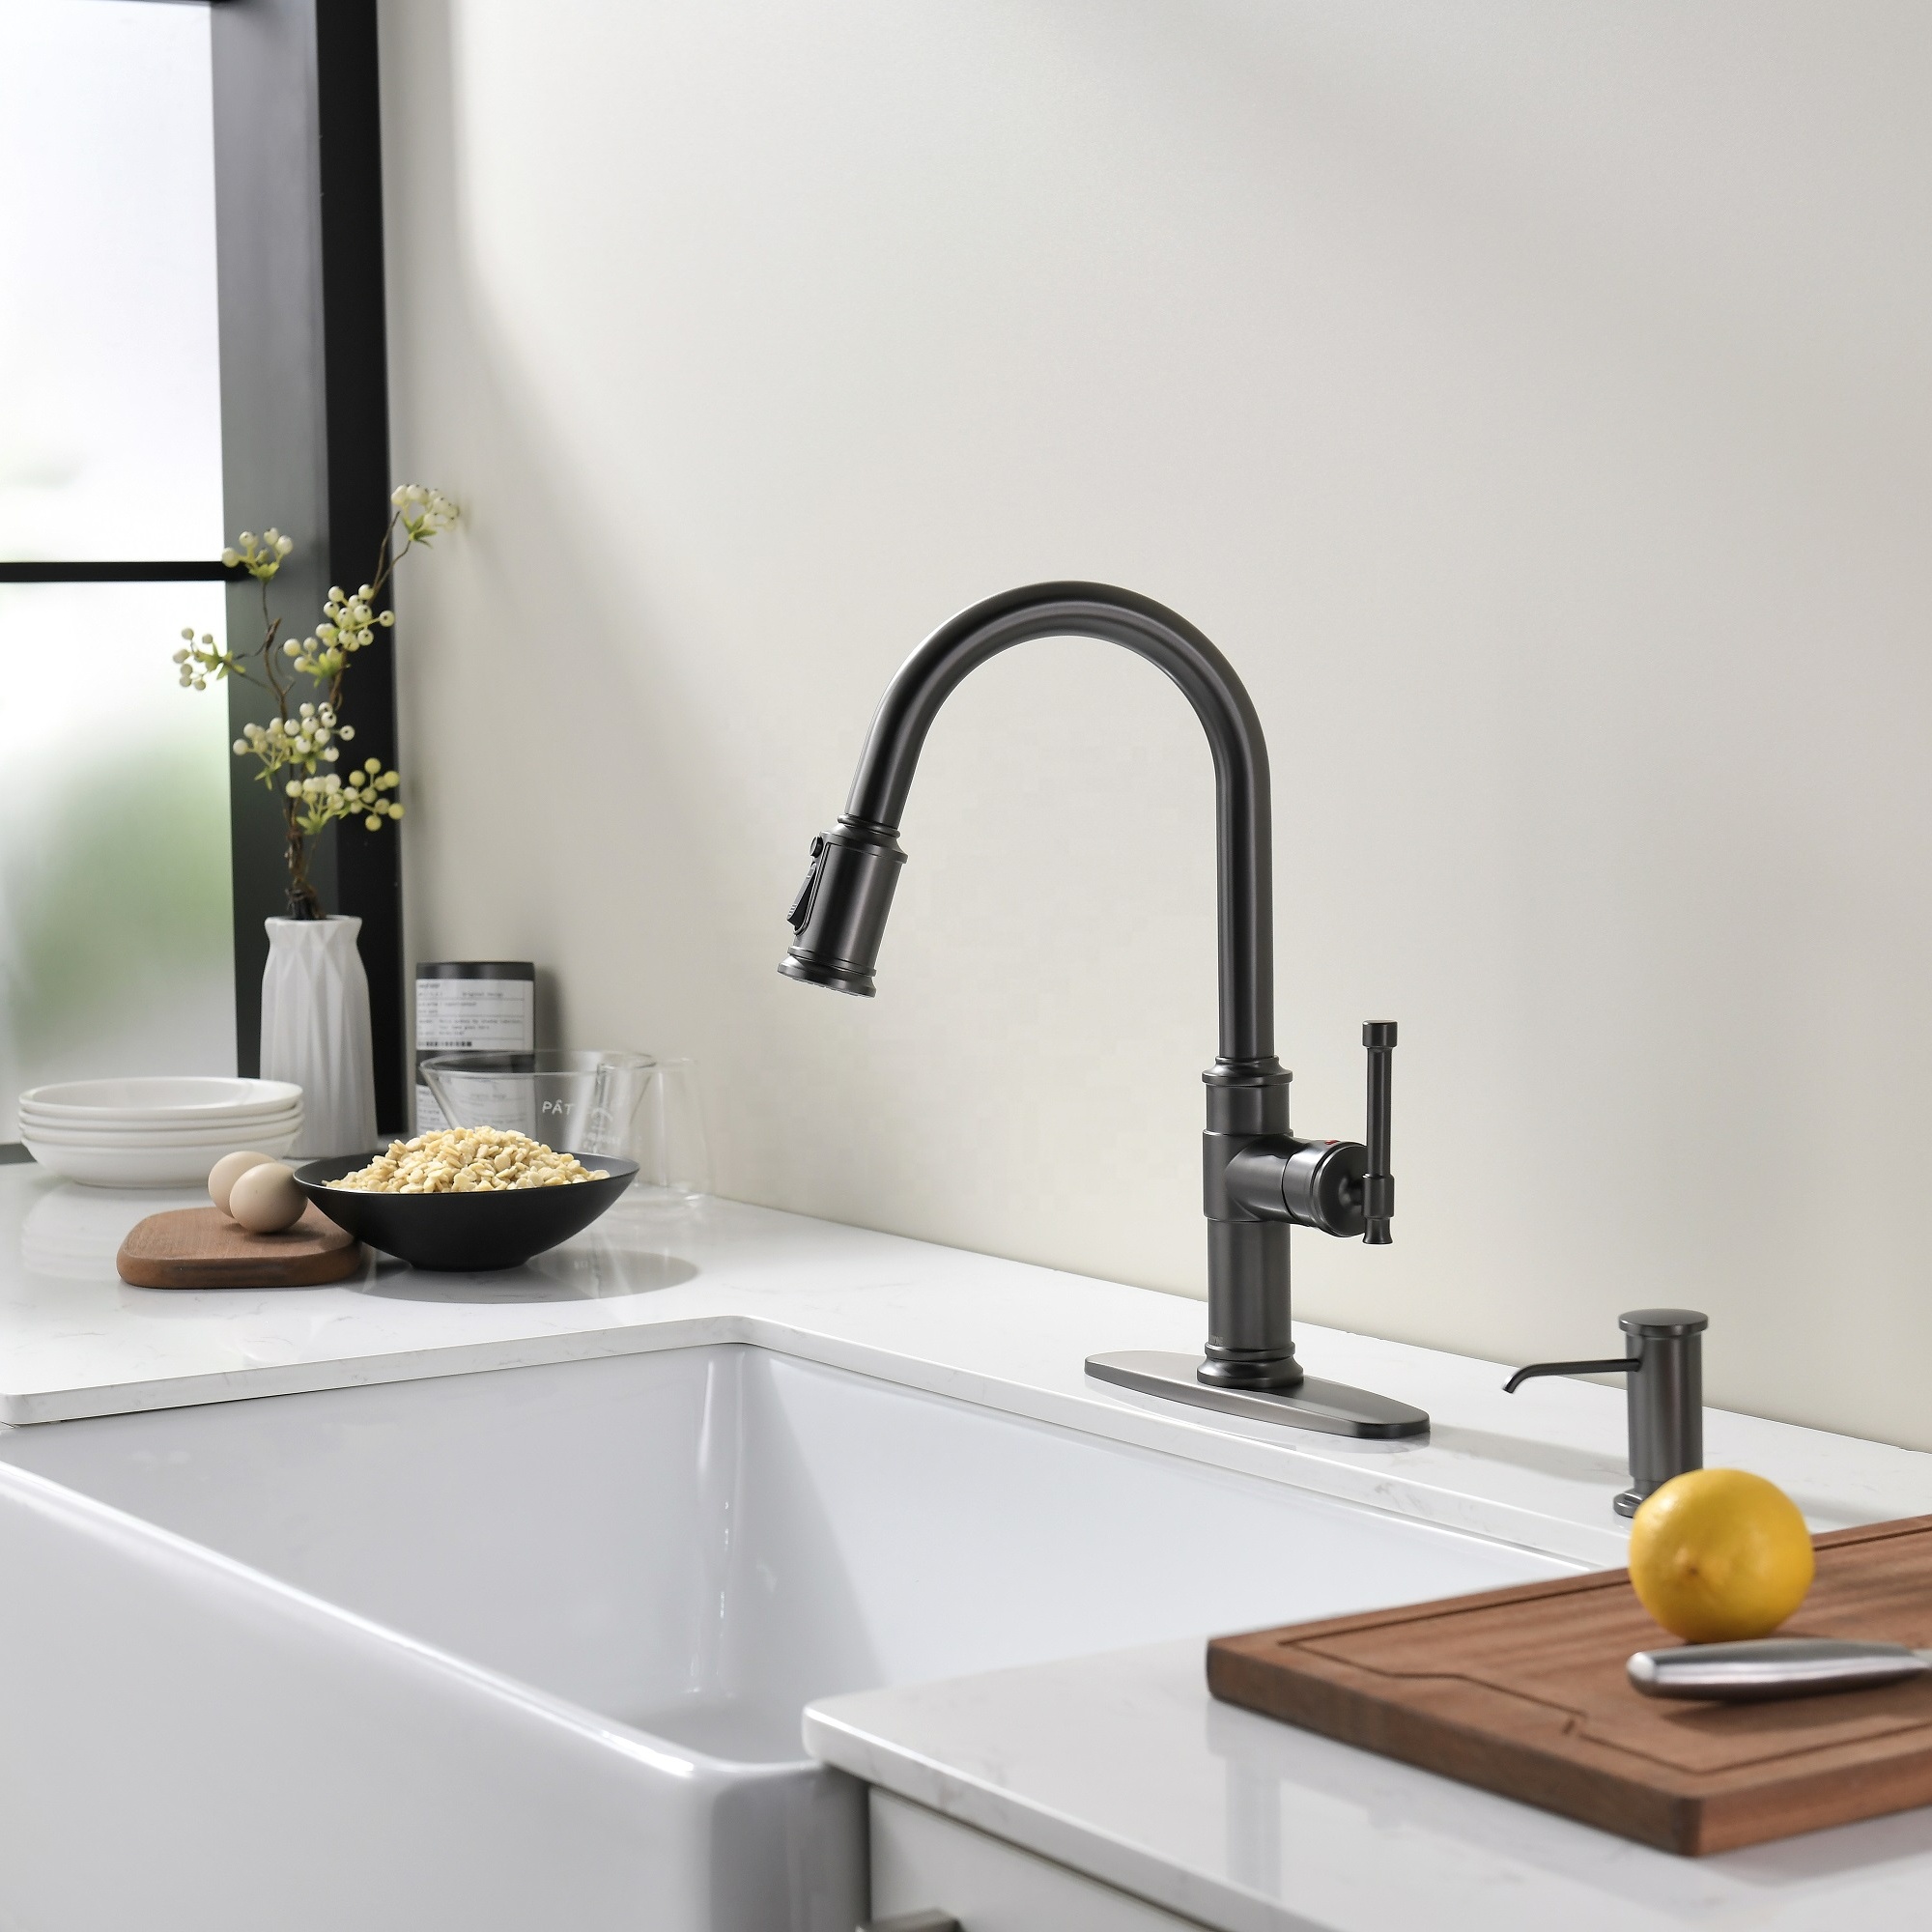 Kitchen Faucet Single Handle Pull Spray Kitchen Faucet Black Stainless High Pressure Kitchen Faucet